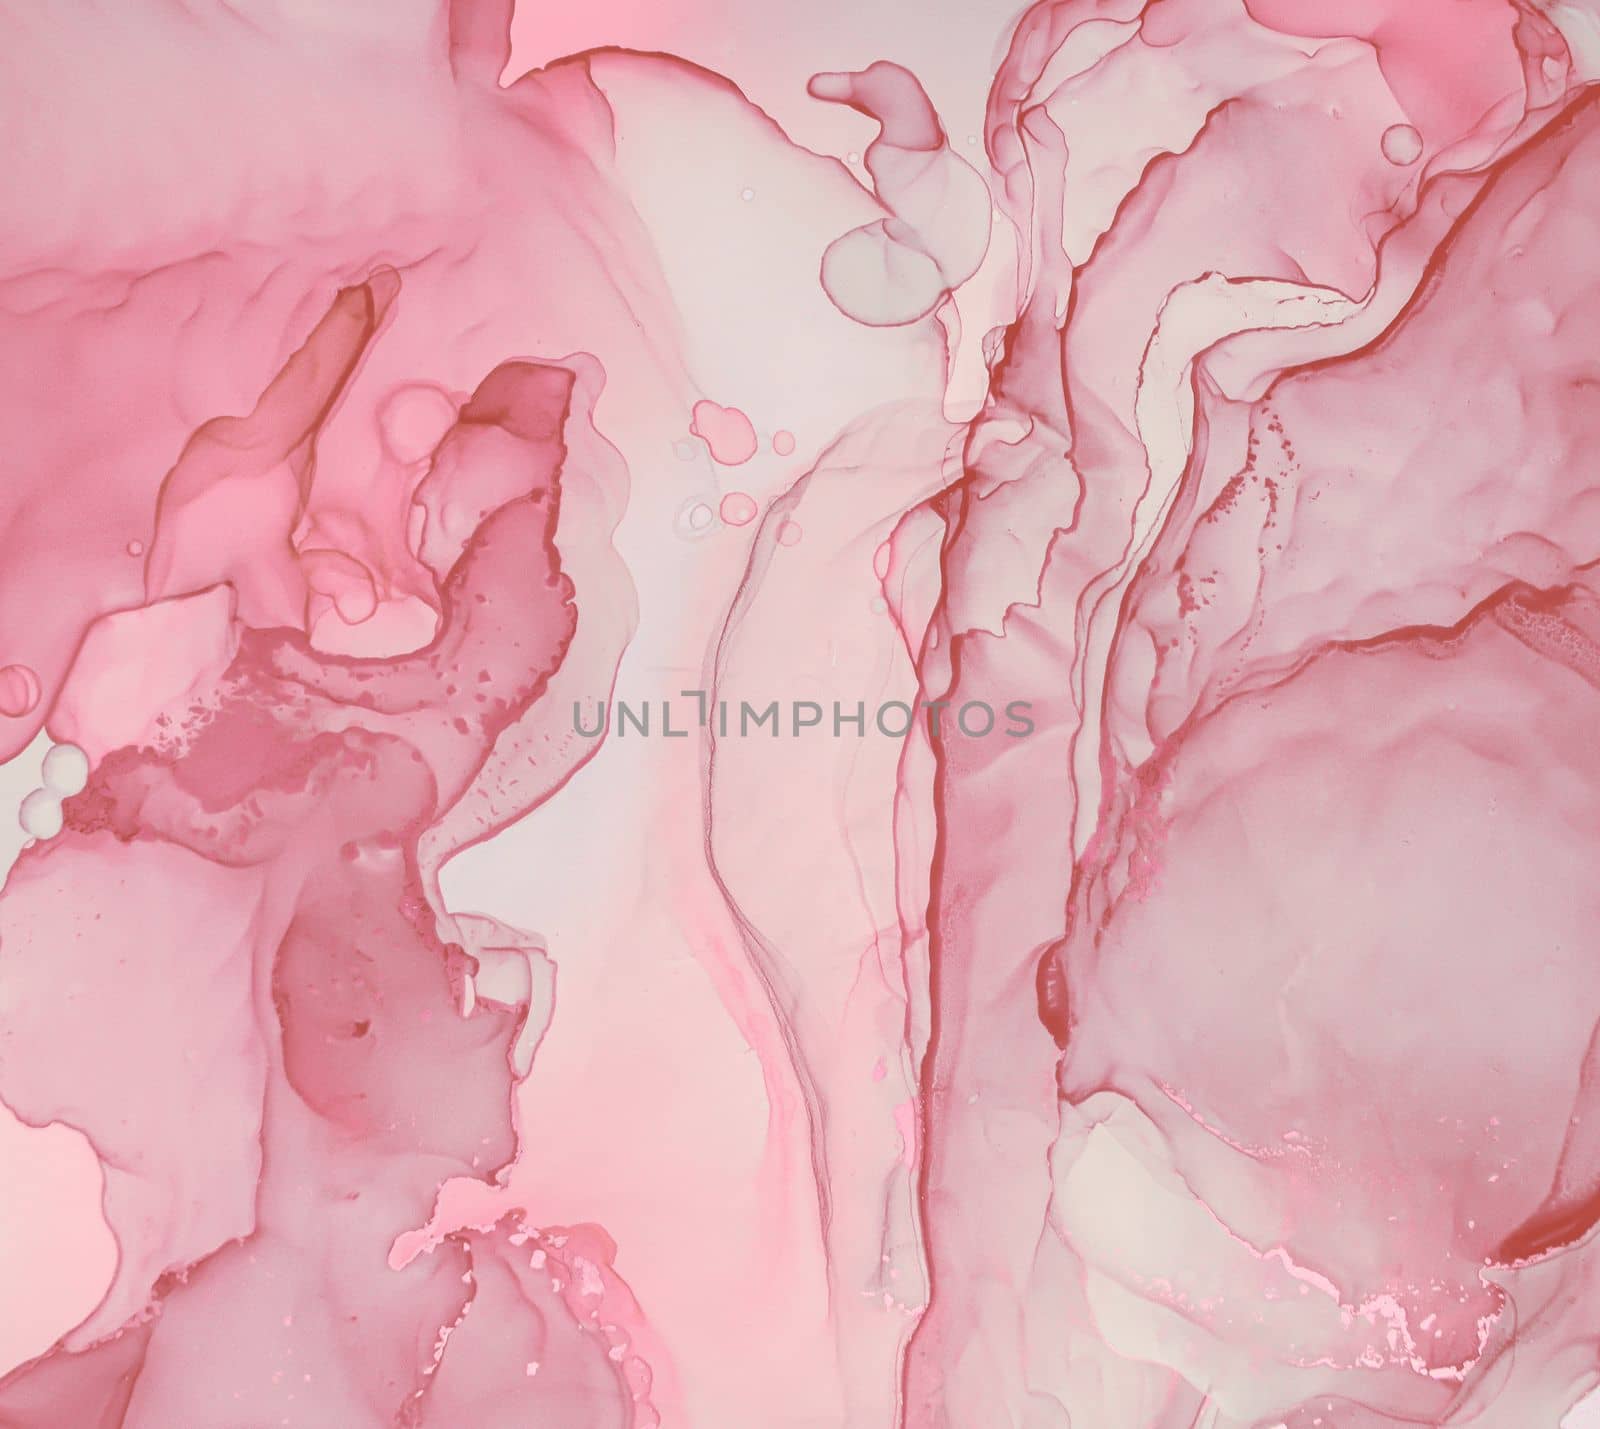 Feminine Liquid Marble. Abstract Illustration. Fluid Flow Painting. Acrylic Wall. Gold Oil Design. Alcohol Luxury Marble. Gentle Background. Art Creative Paint. Ethereal Pink Marble.